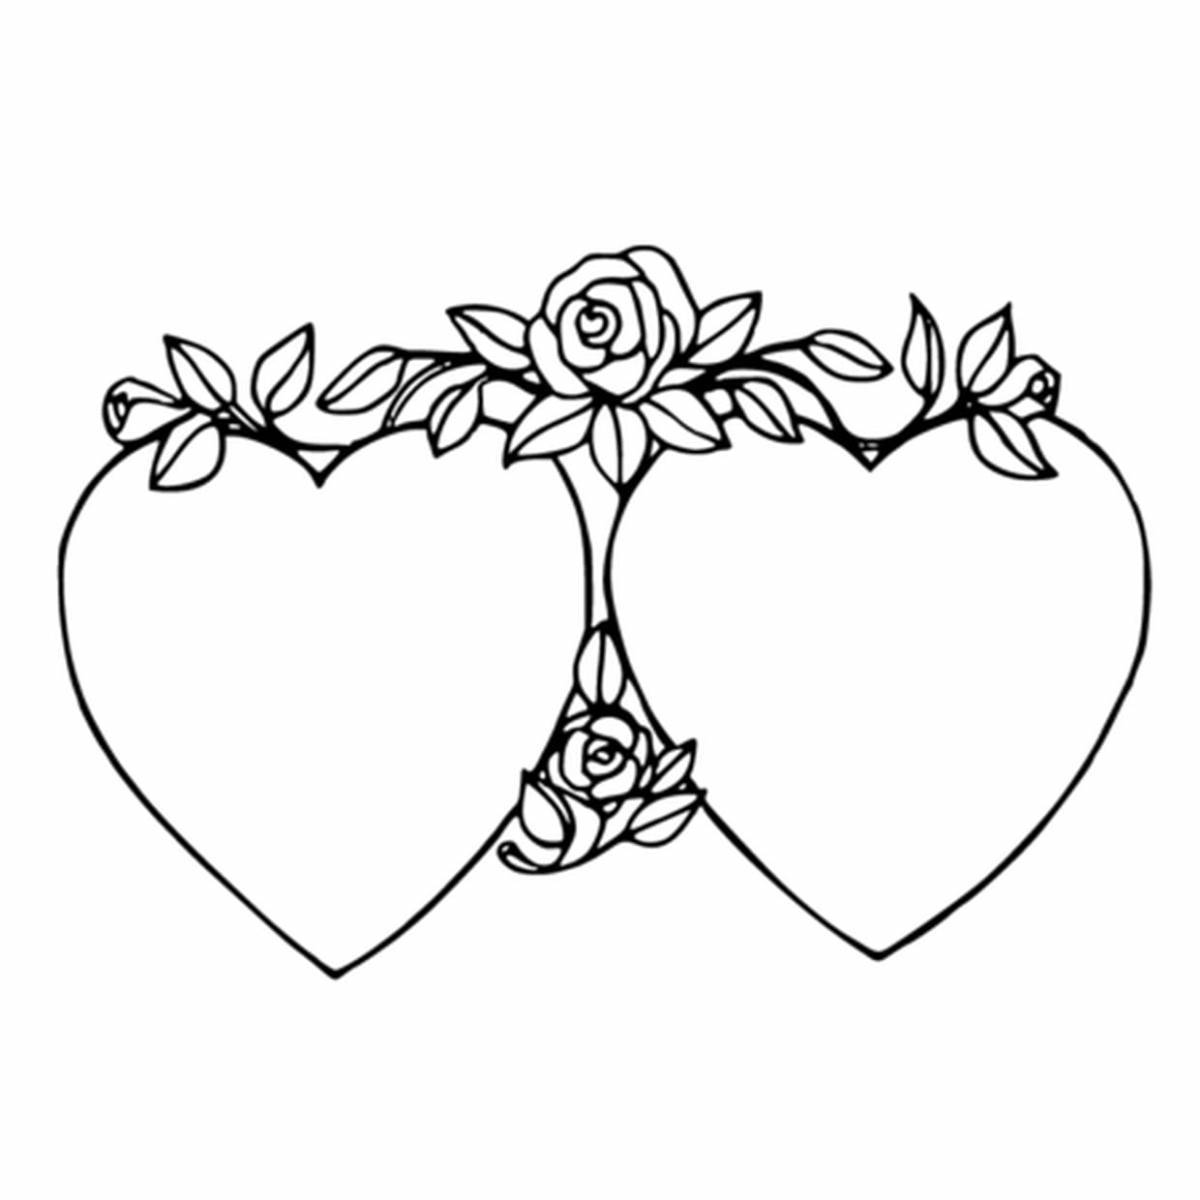 Beautiful heart coloring page